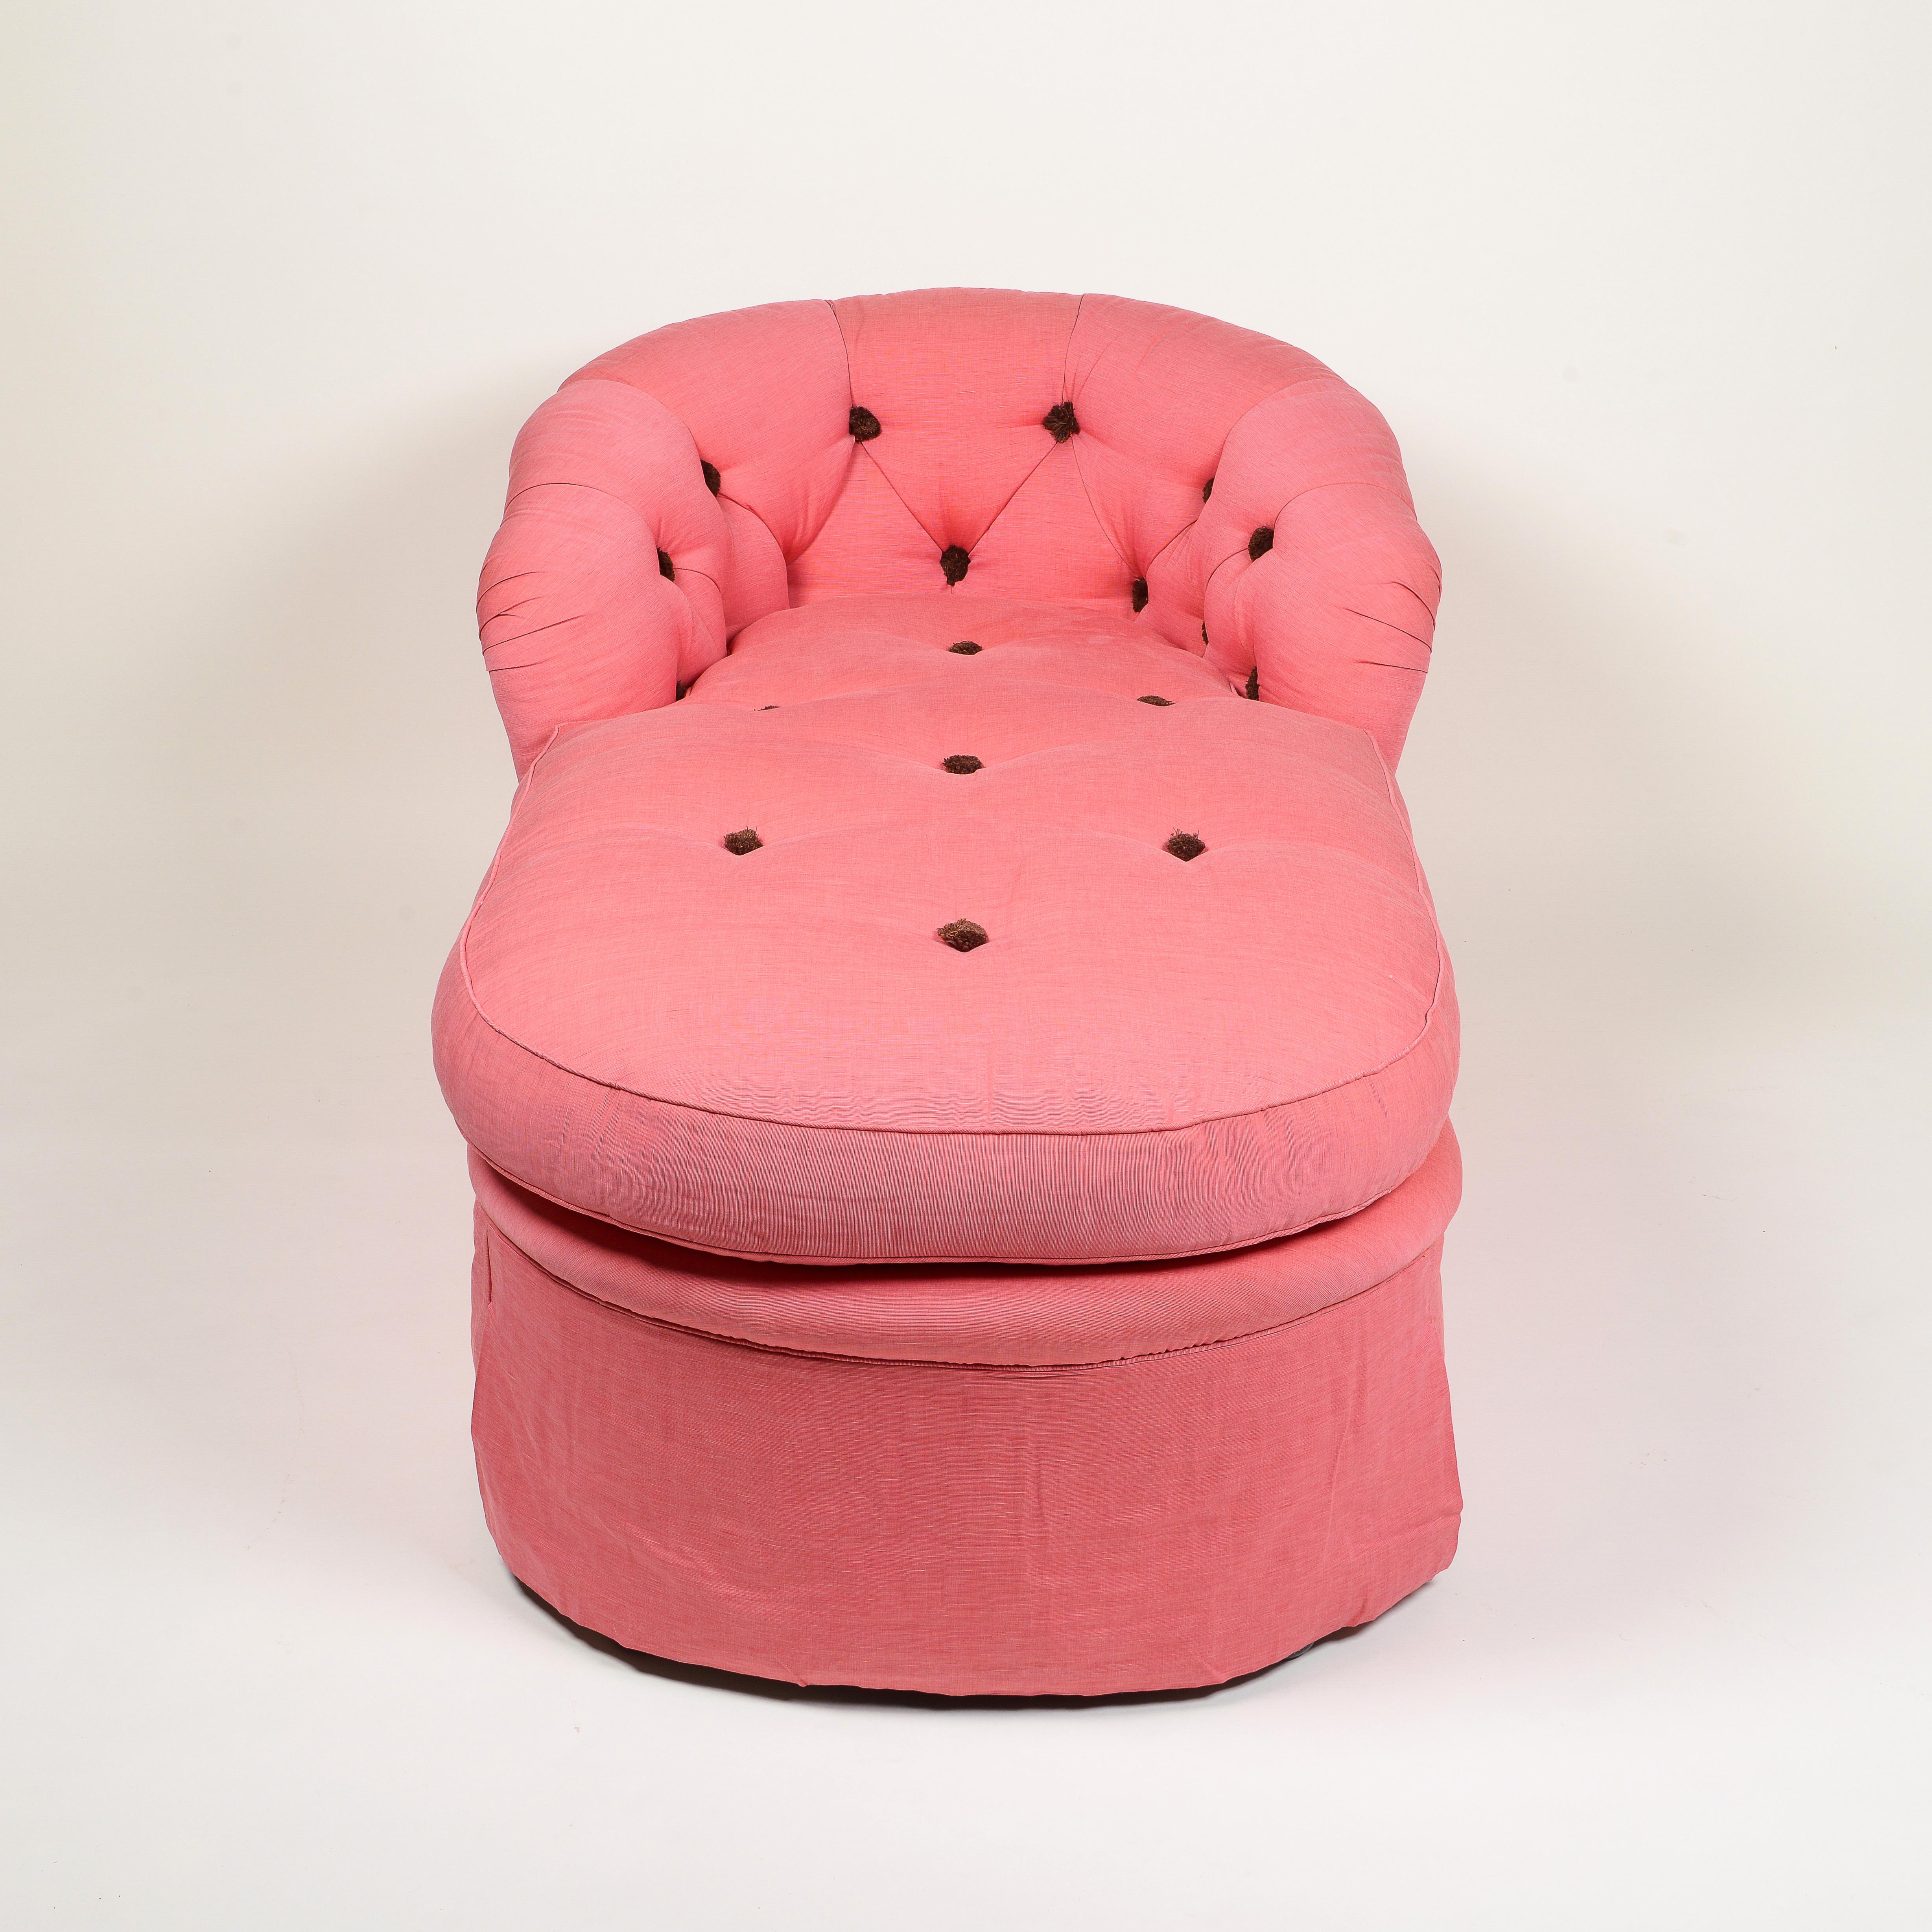 Contemporary Raspberry Cotton-Upholstered Tufted Chaise Longue